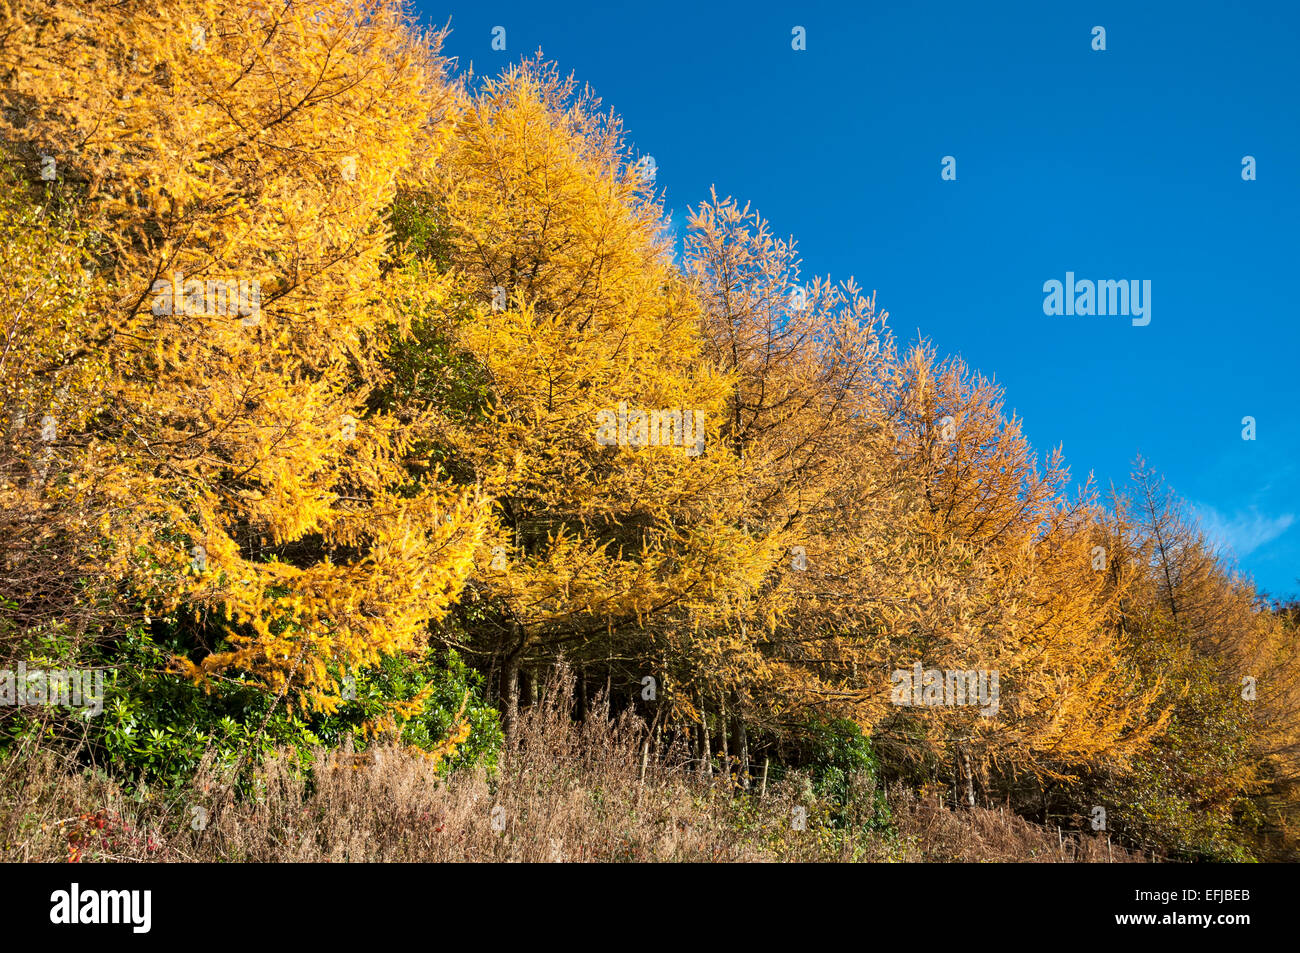 Vivid colour contrast of bright yellow Larch trees and deep blue sky in a scene of autumn colour in the Peak District. Stock Photo